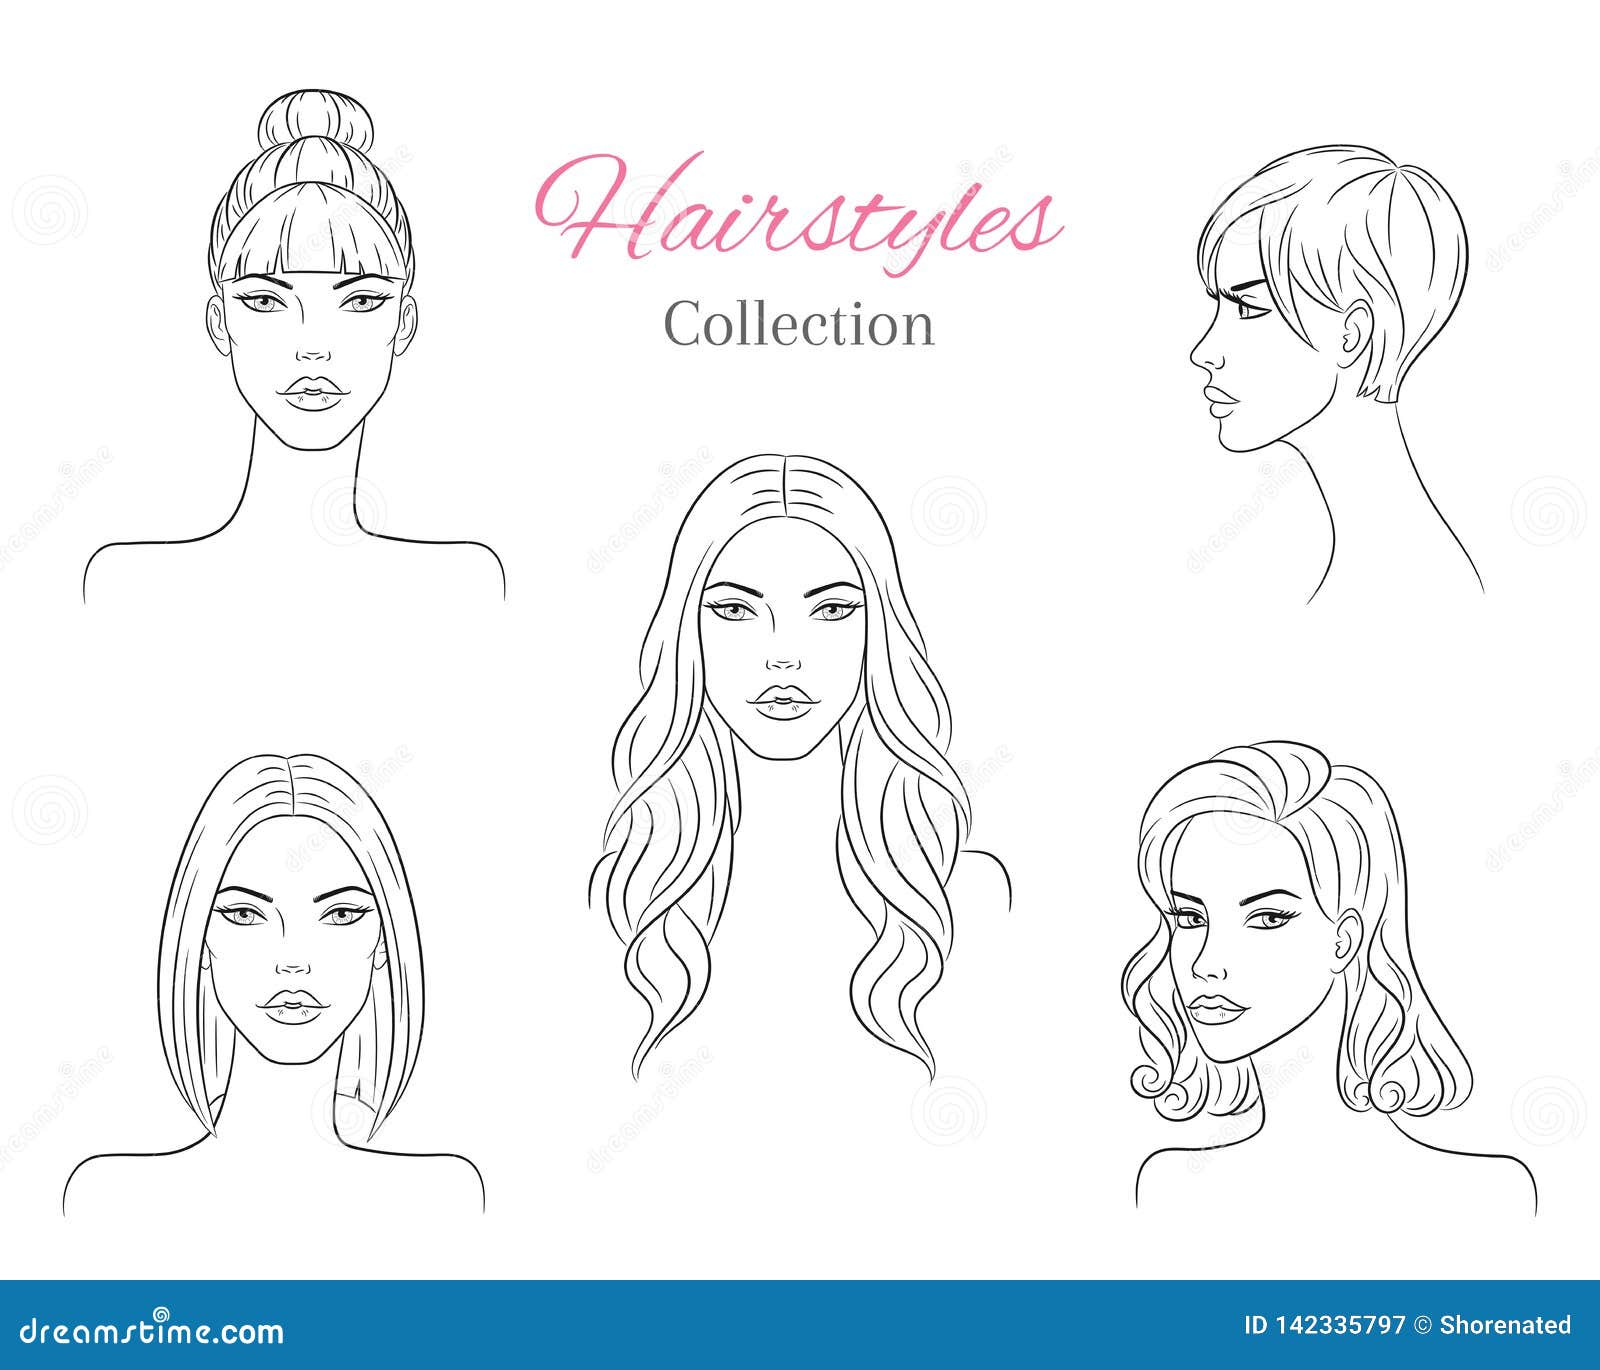 Hairstyles Sketch by AlysstheRedNosed on DeviantArt